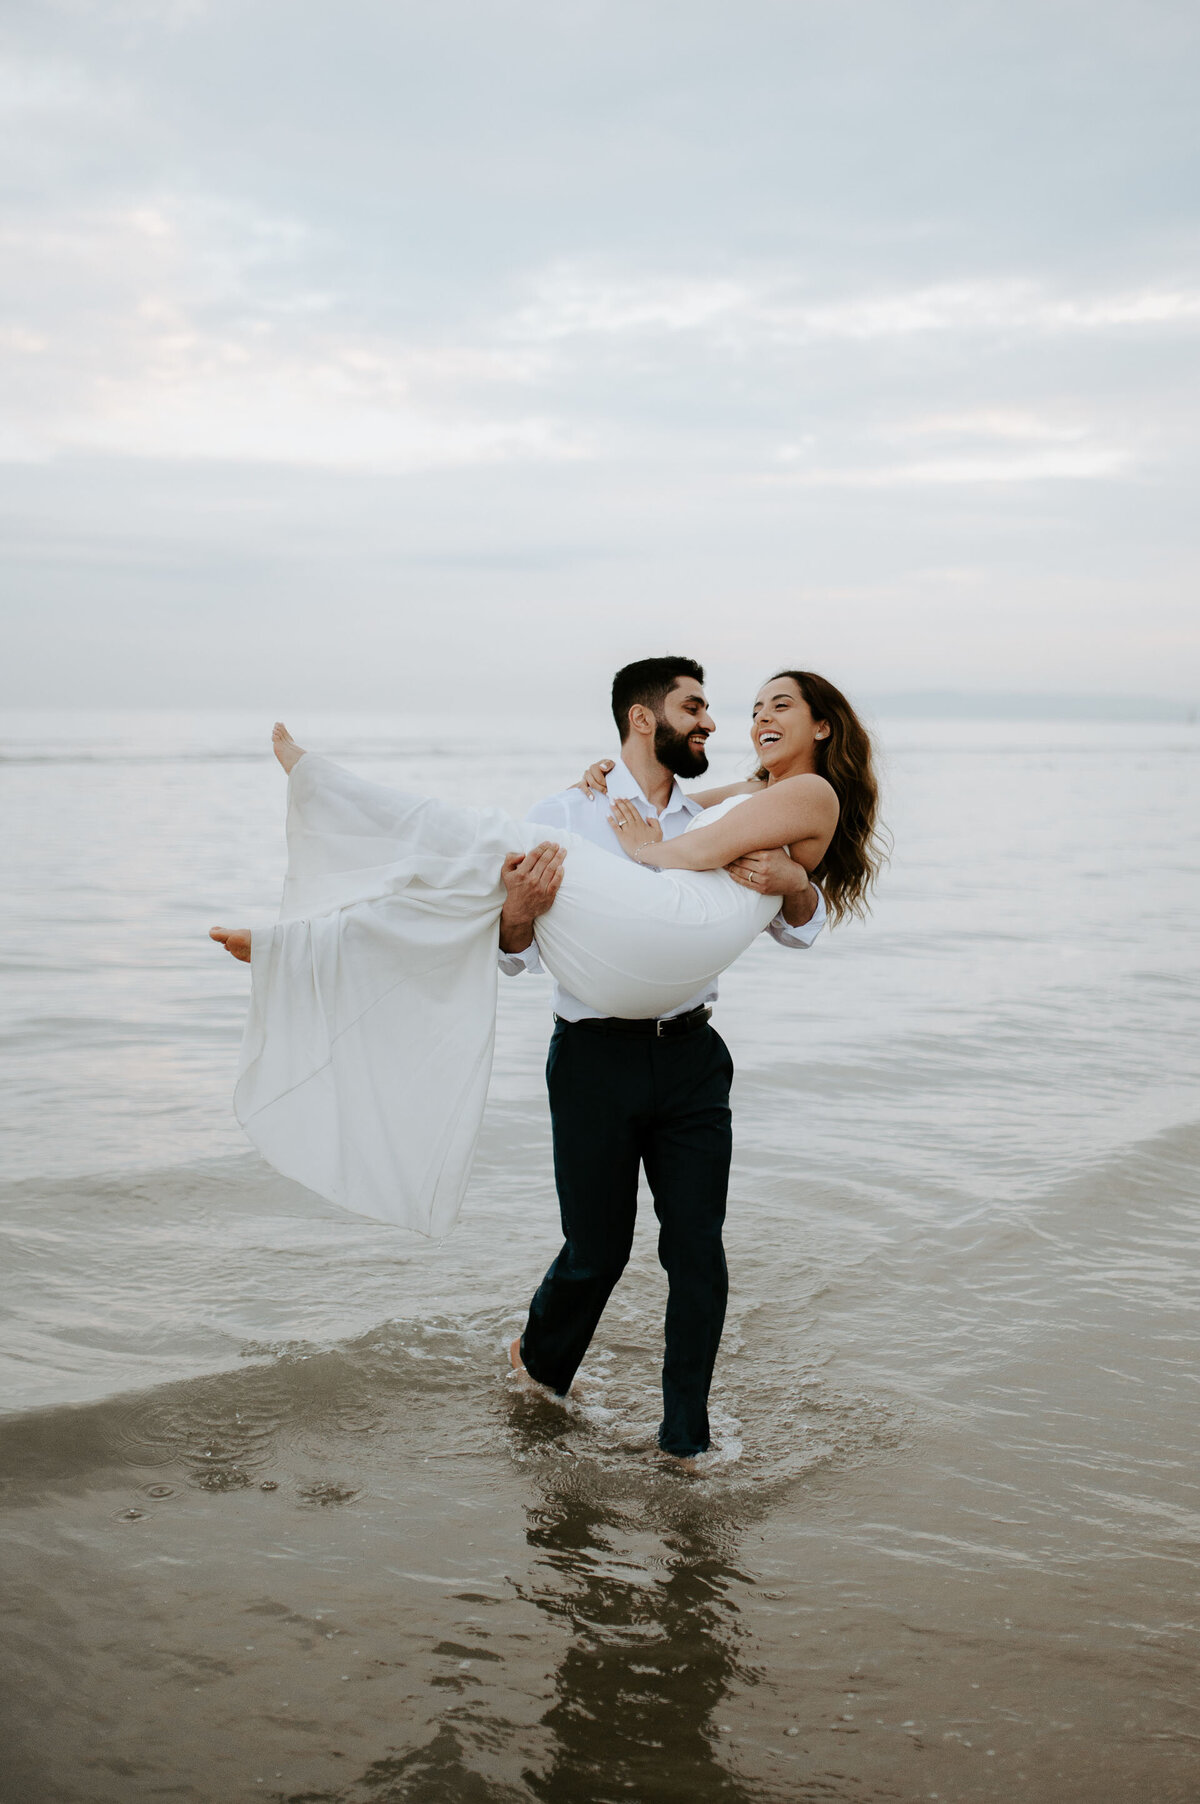 Demiana and Goergeuos - Beach Shoot - 2.6.21 - Laura Williams Photography  - 147